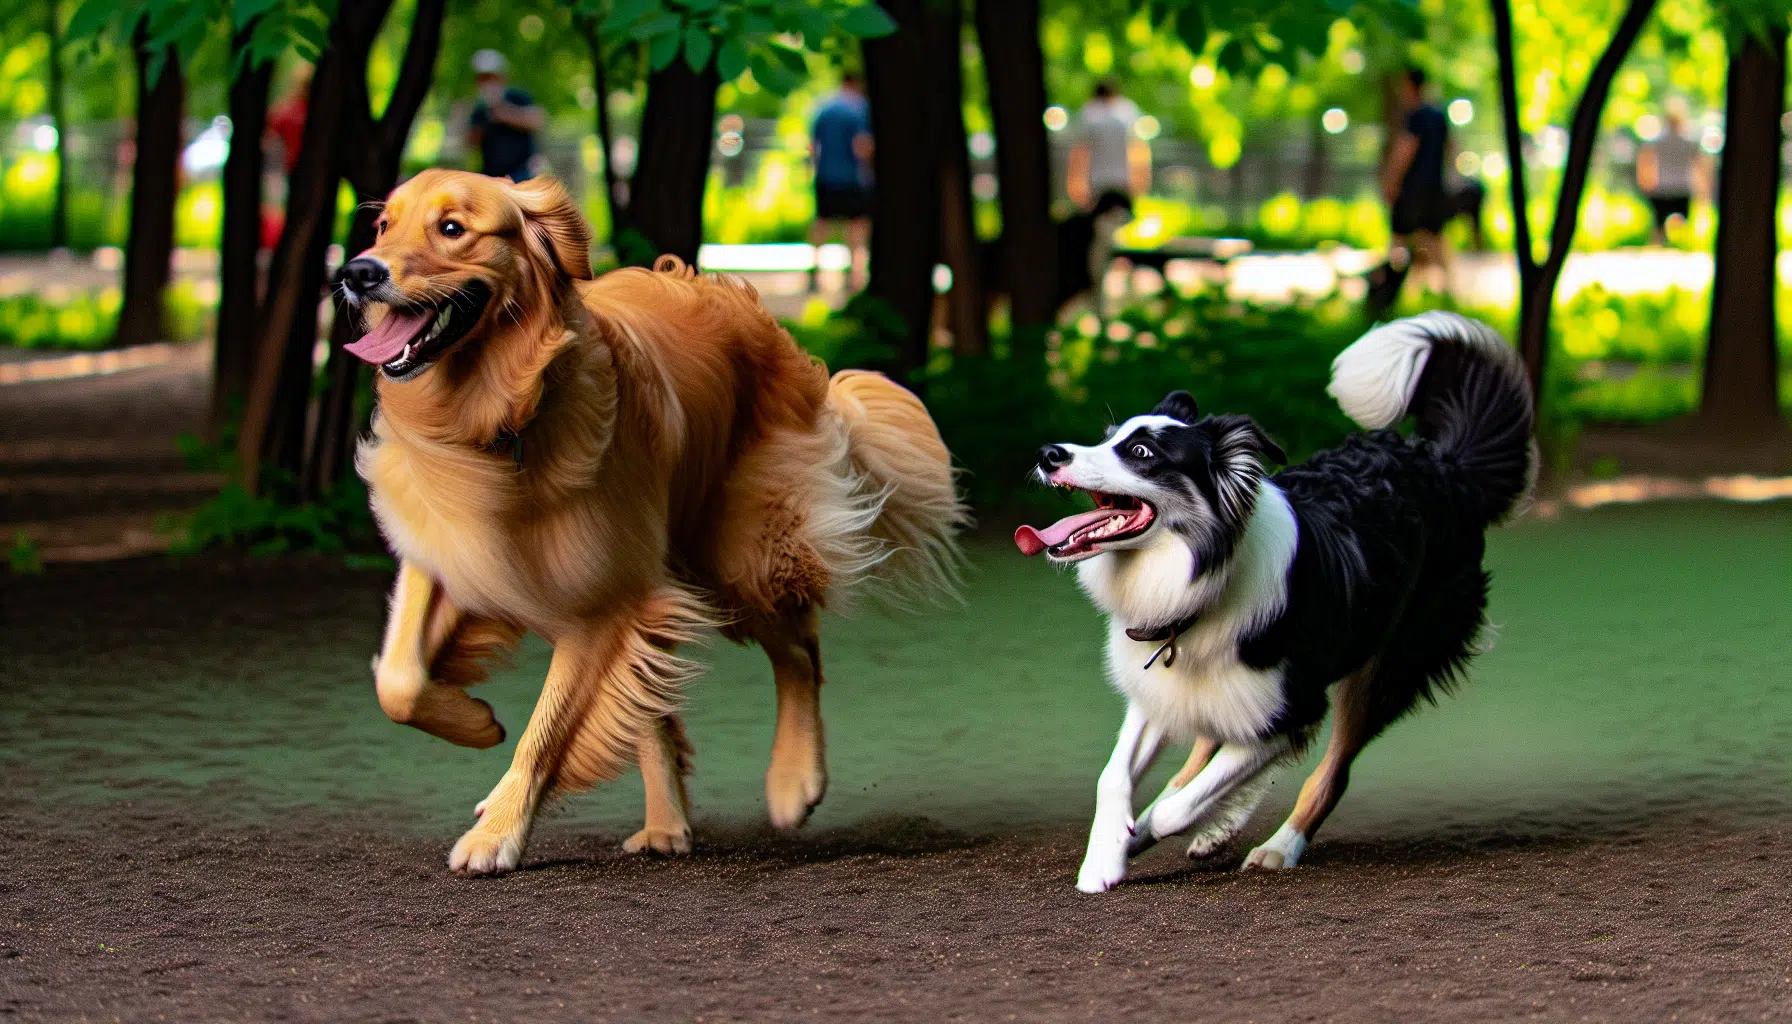 A happy dog playing with another dog at the local dog park